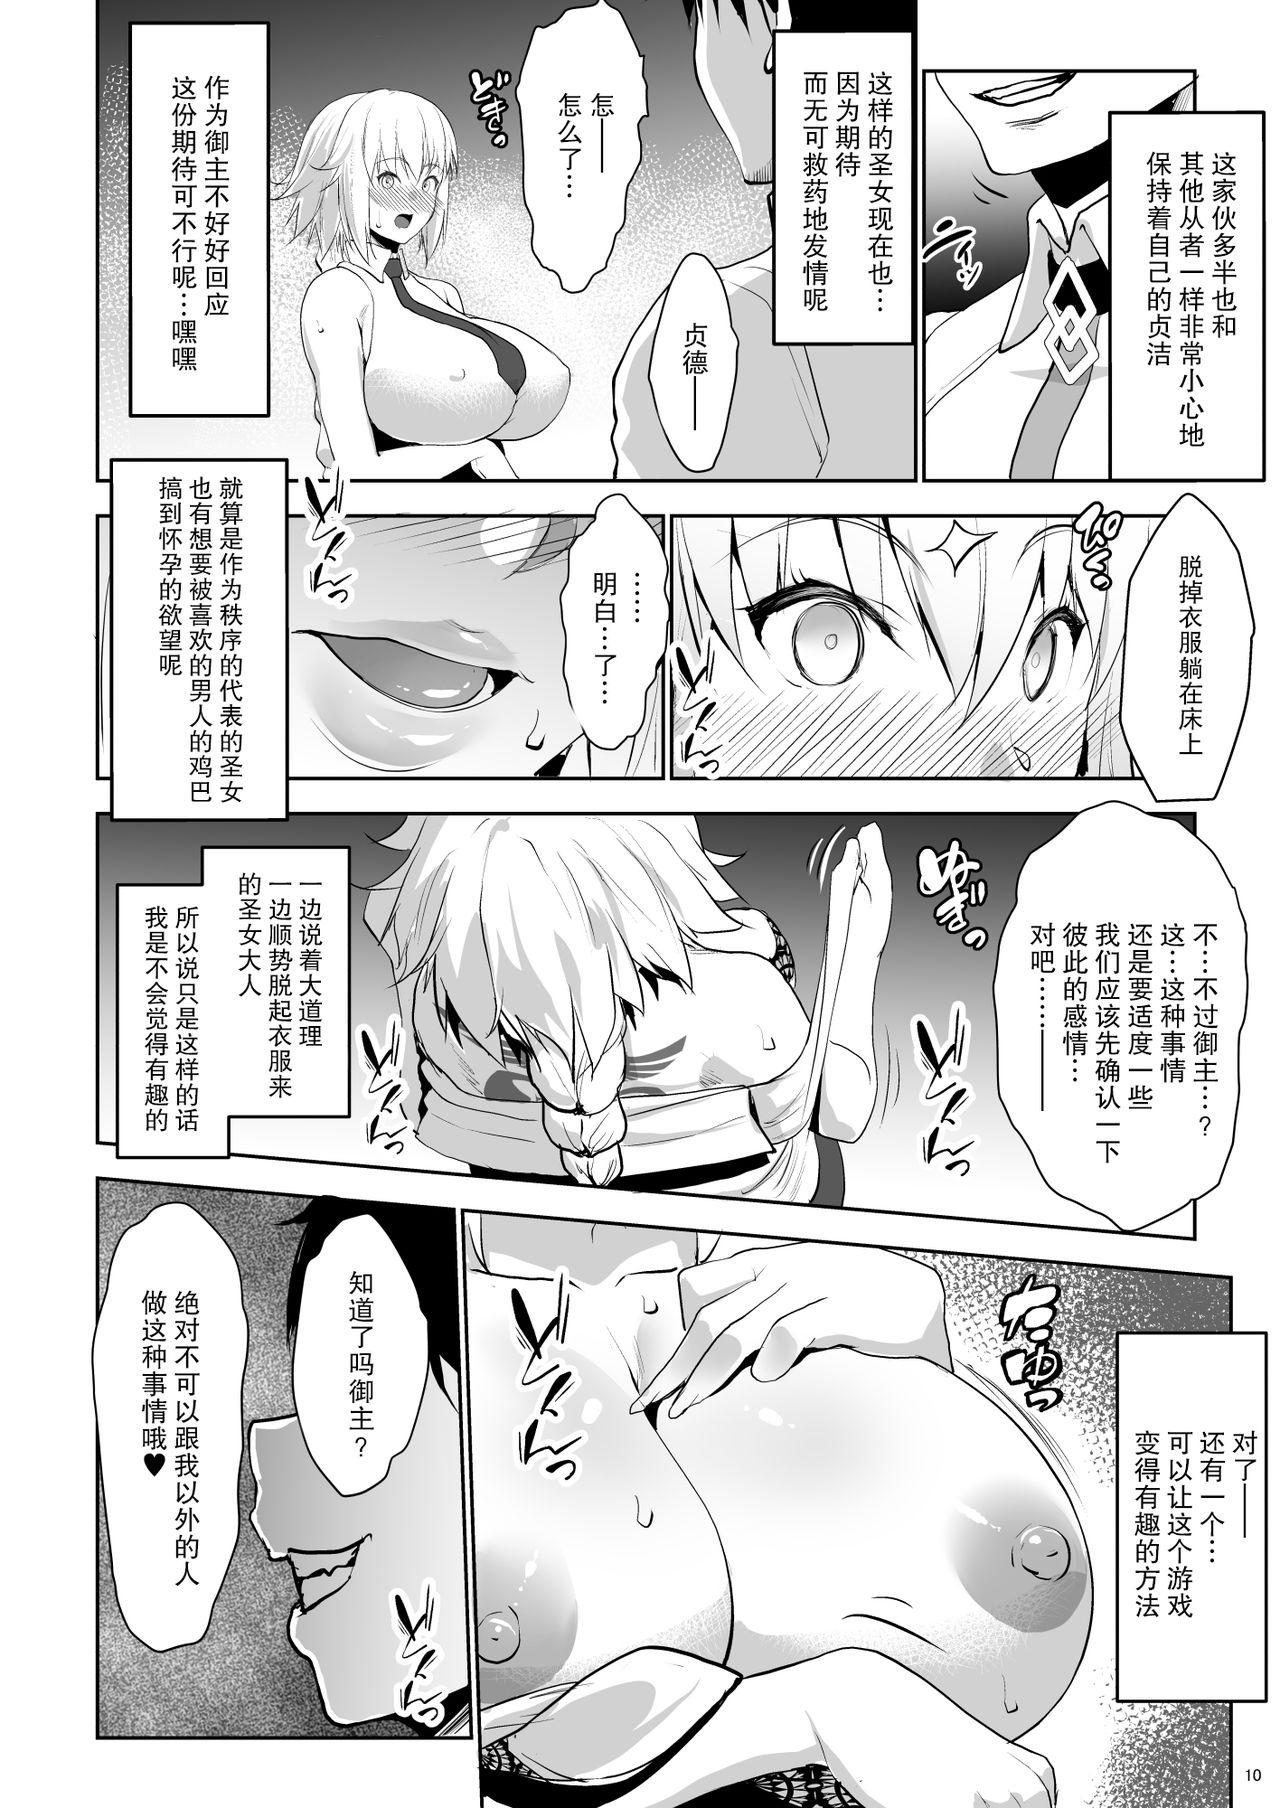 Cream Pie Sapohame Jeanne - Fate grand order She - Page 10